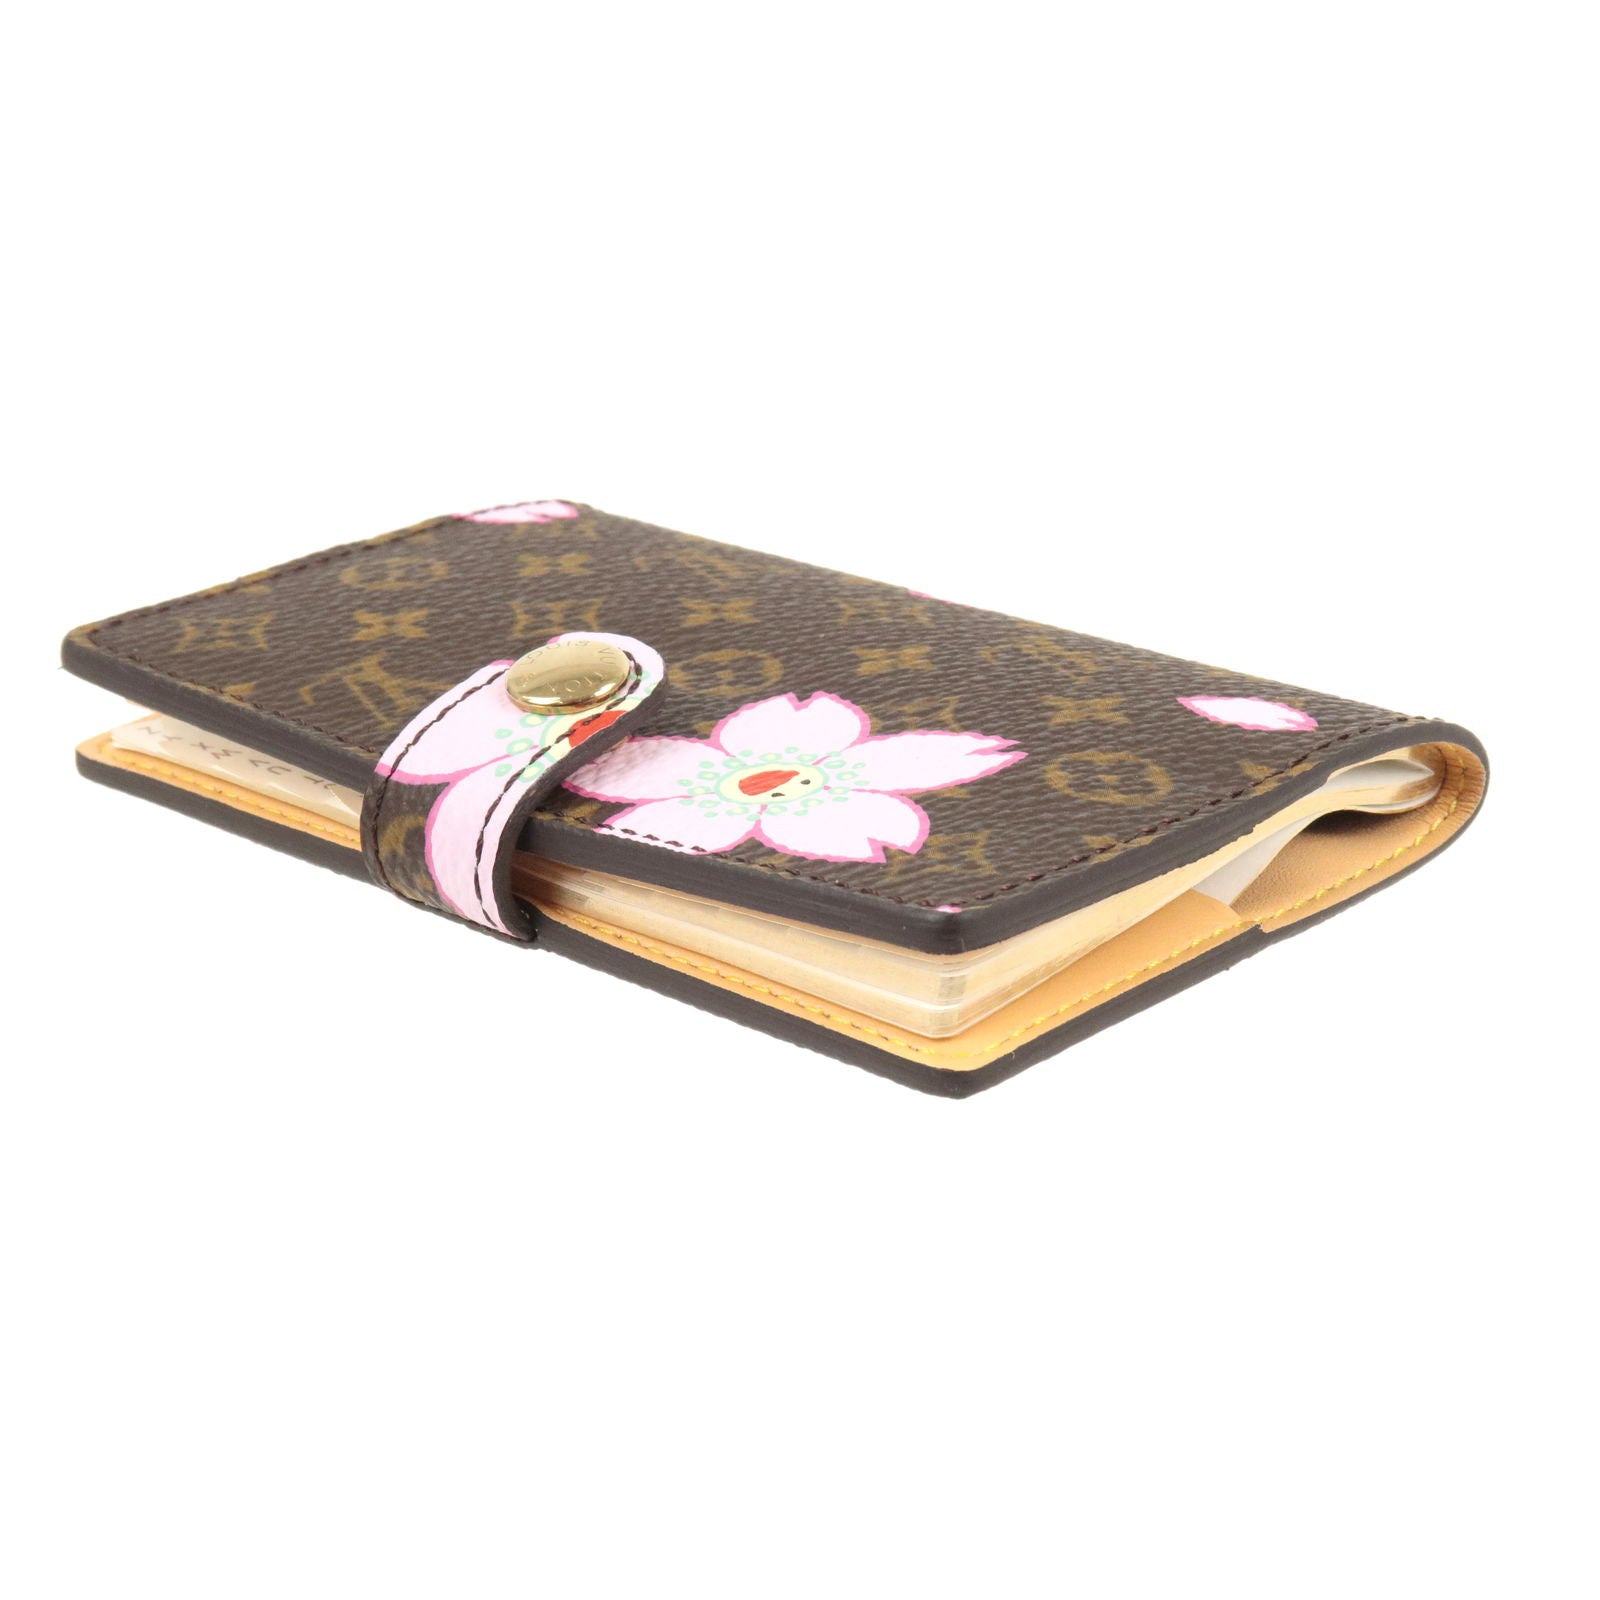 Vintage Gucci Agenda Cover – The Luxury Exchange PDX